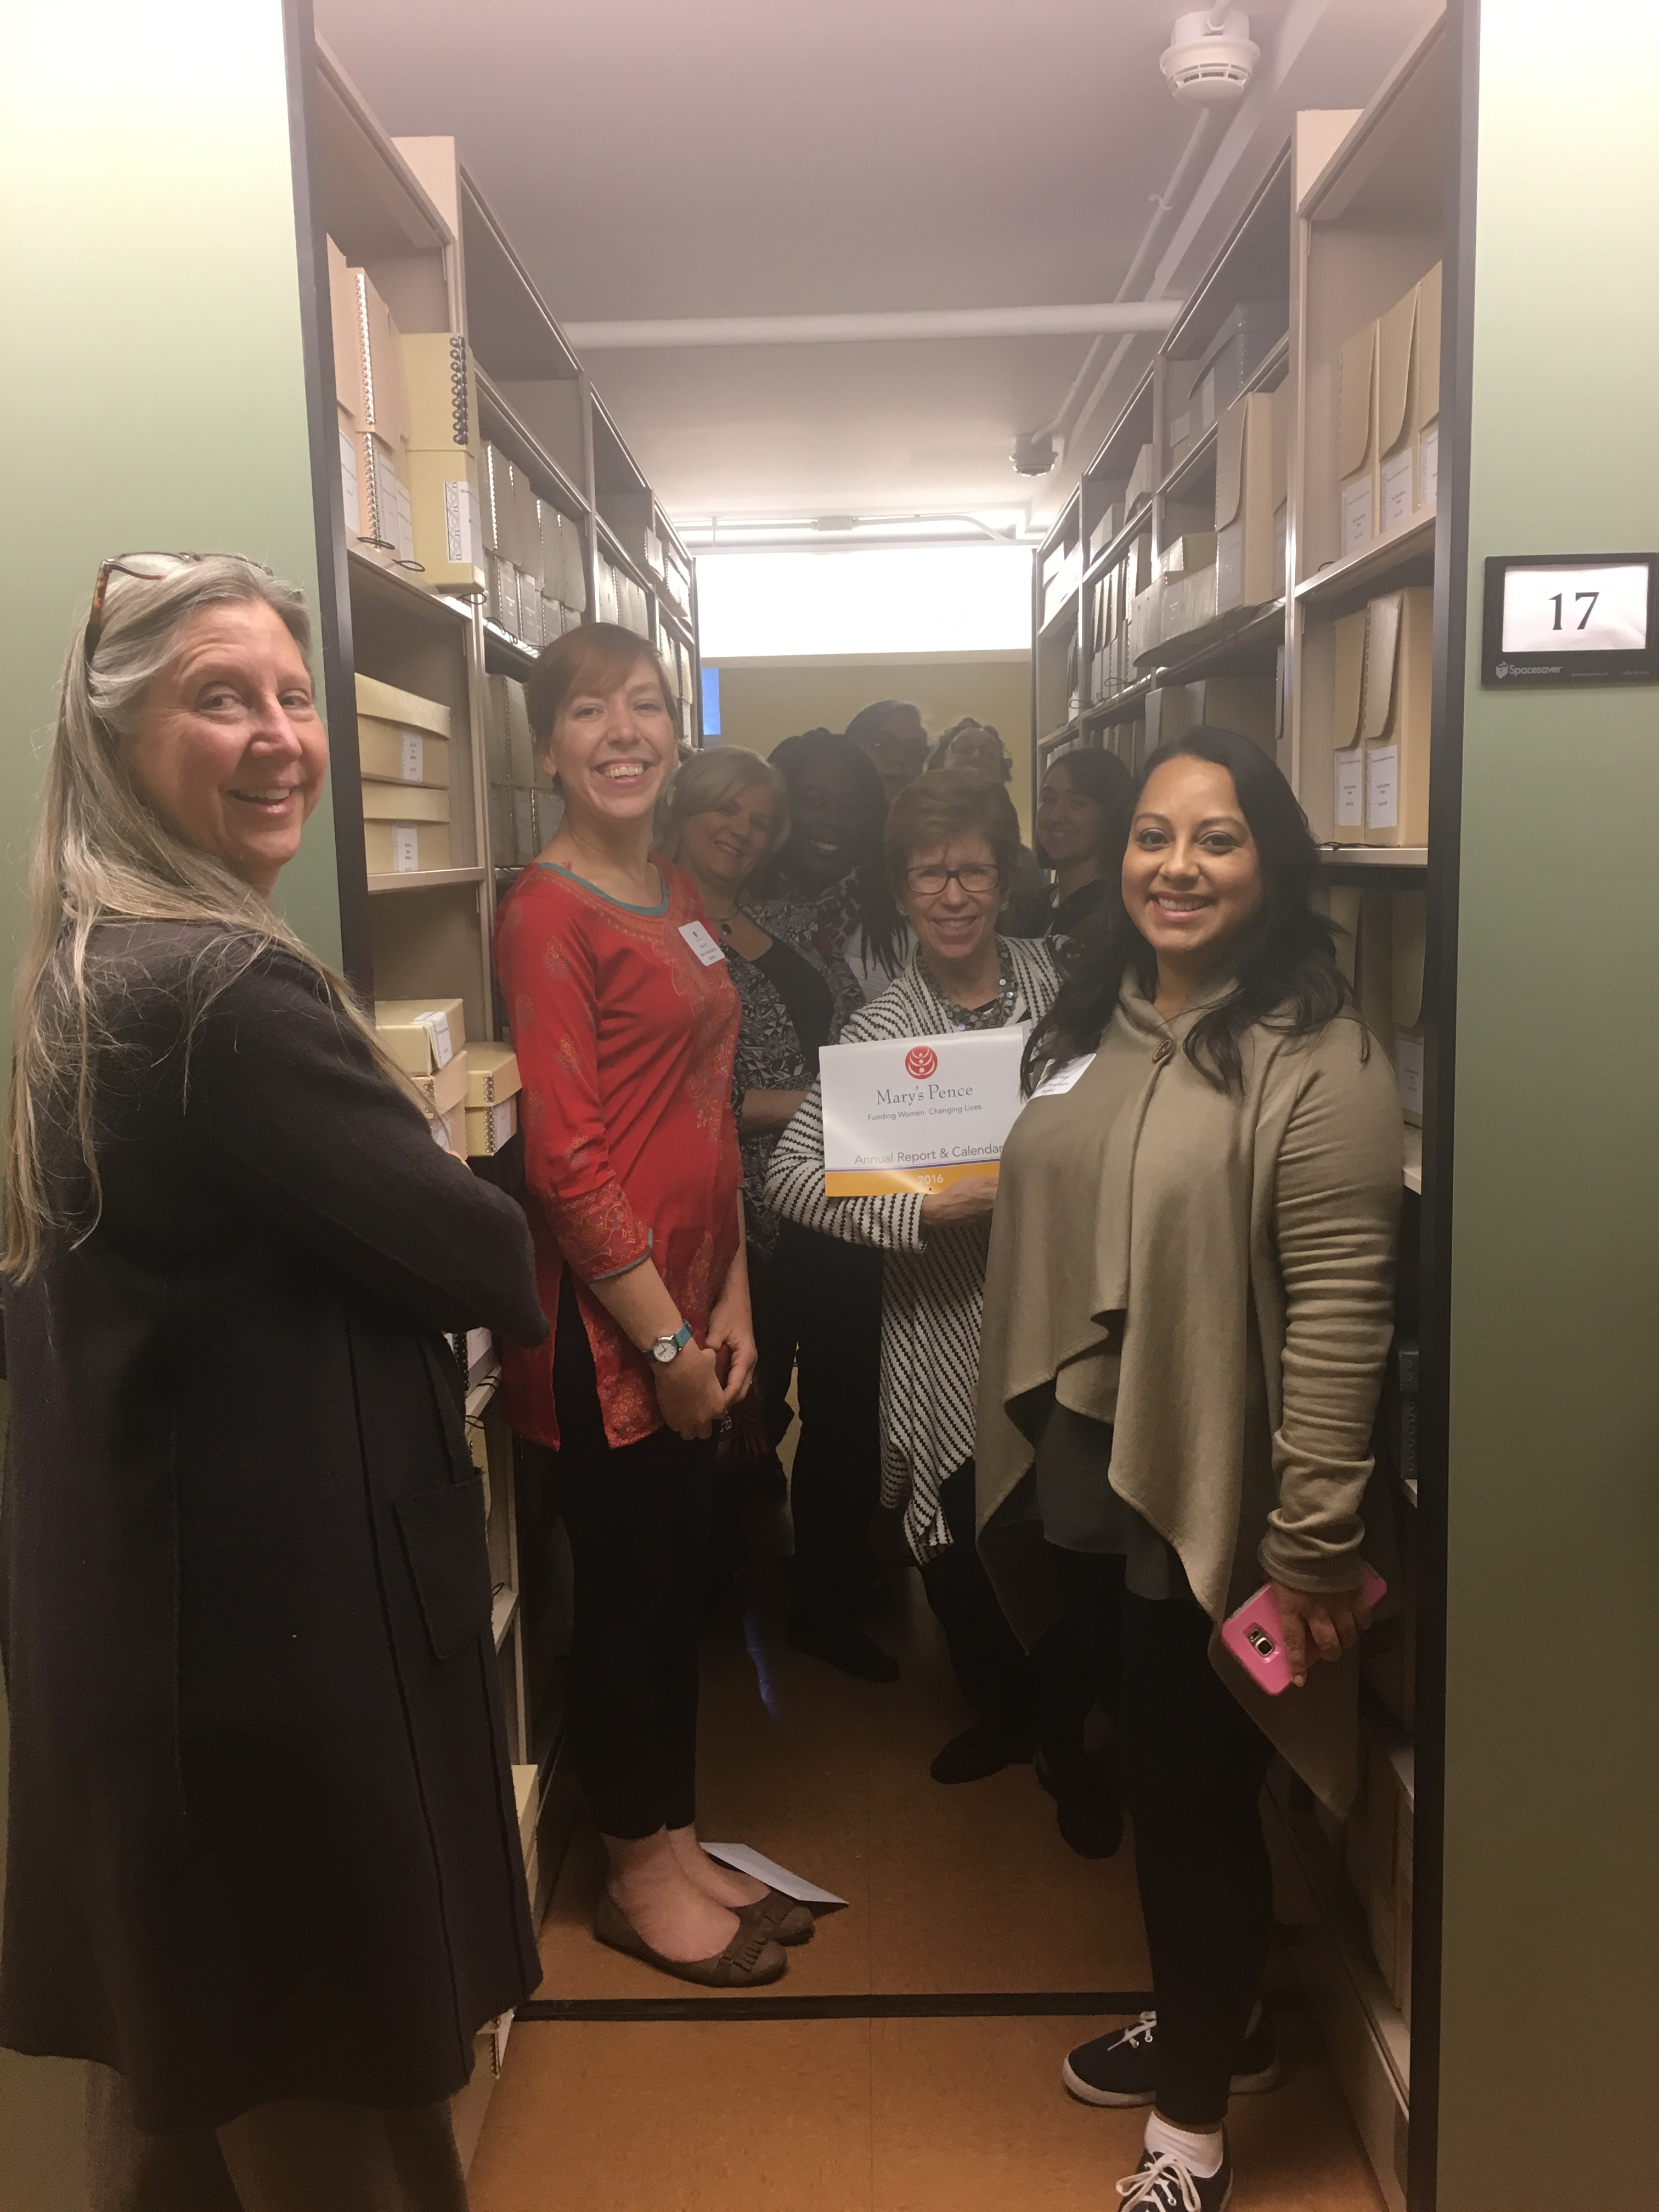 Board members from Mary's Pence view their organization's collection at the WLA.